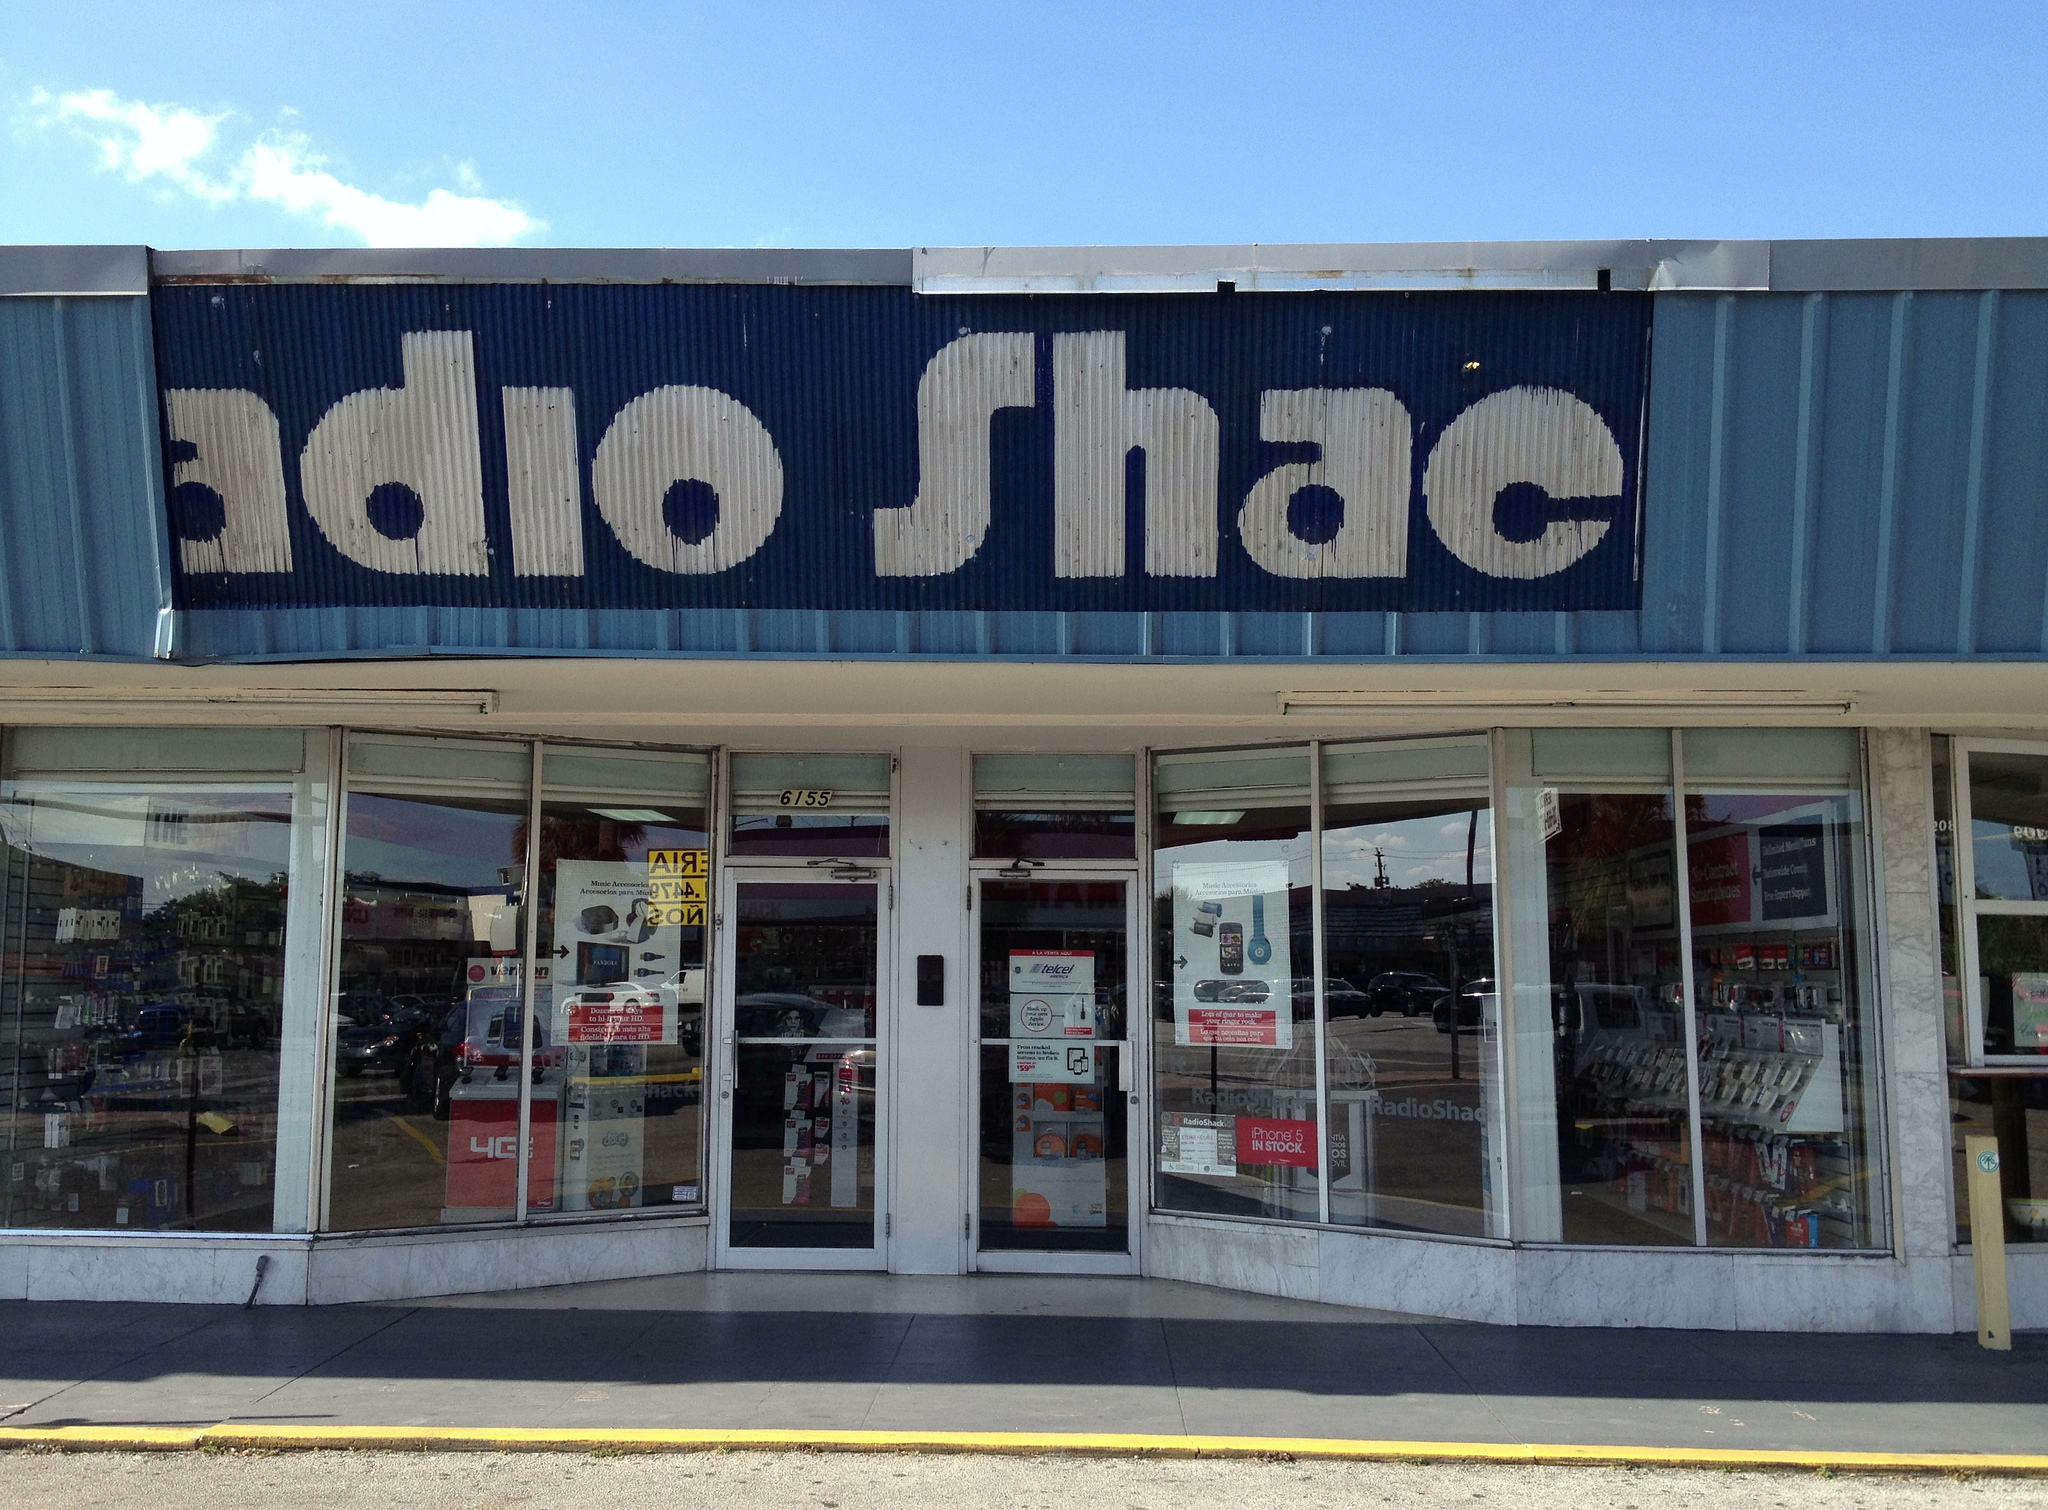 There Are Some RadioShack Stores That Are Very Successful